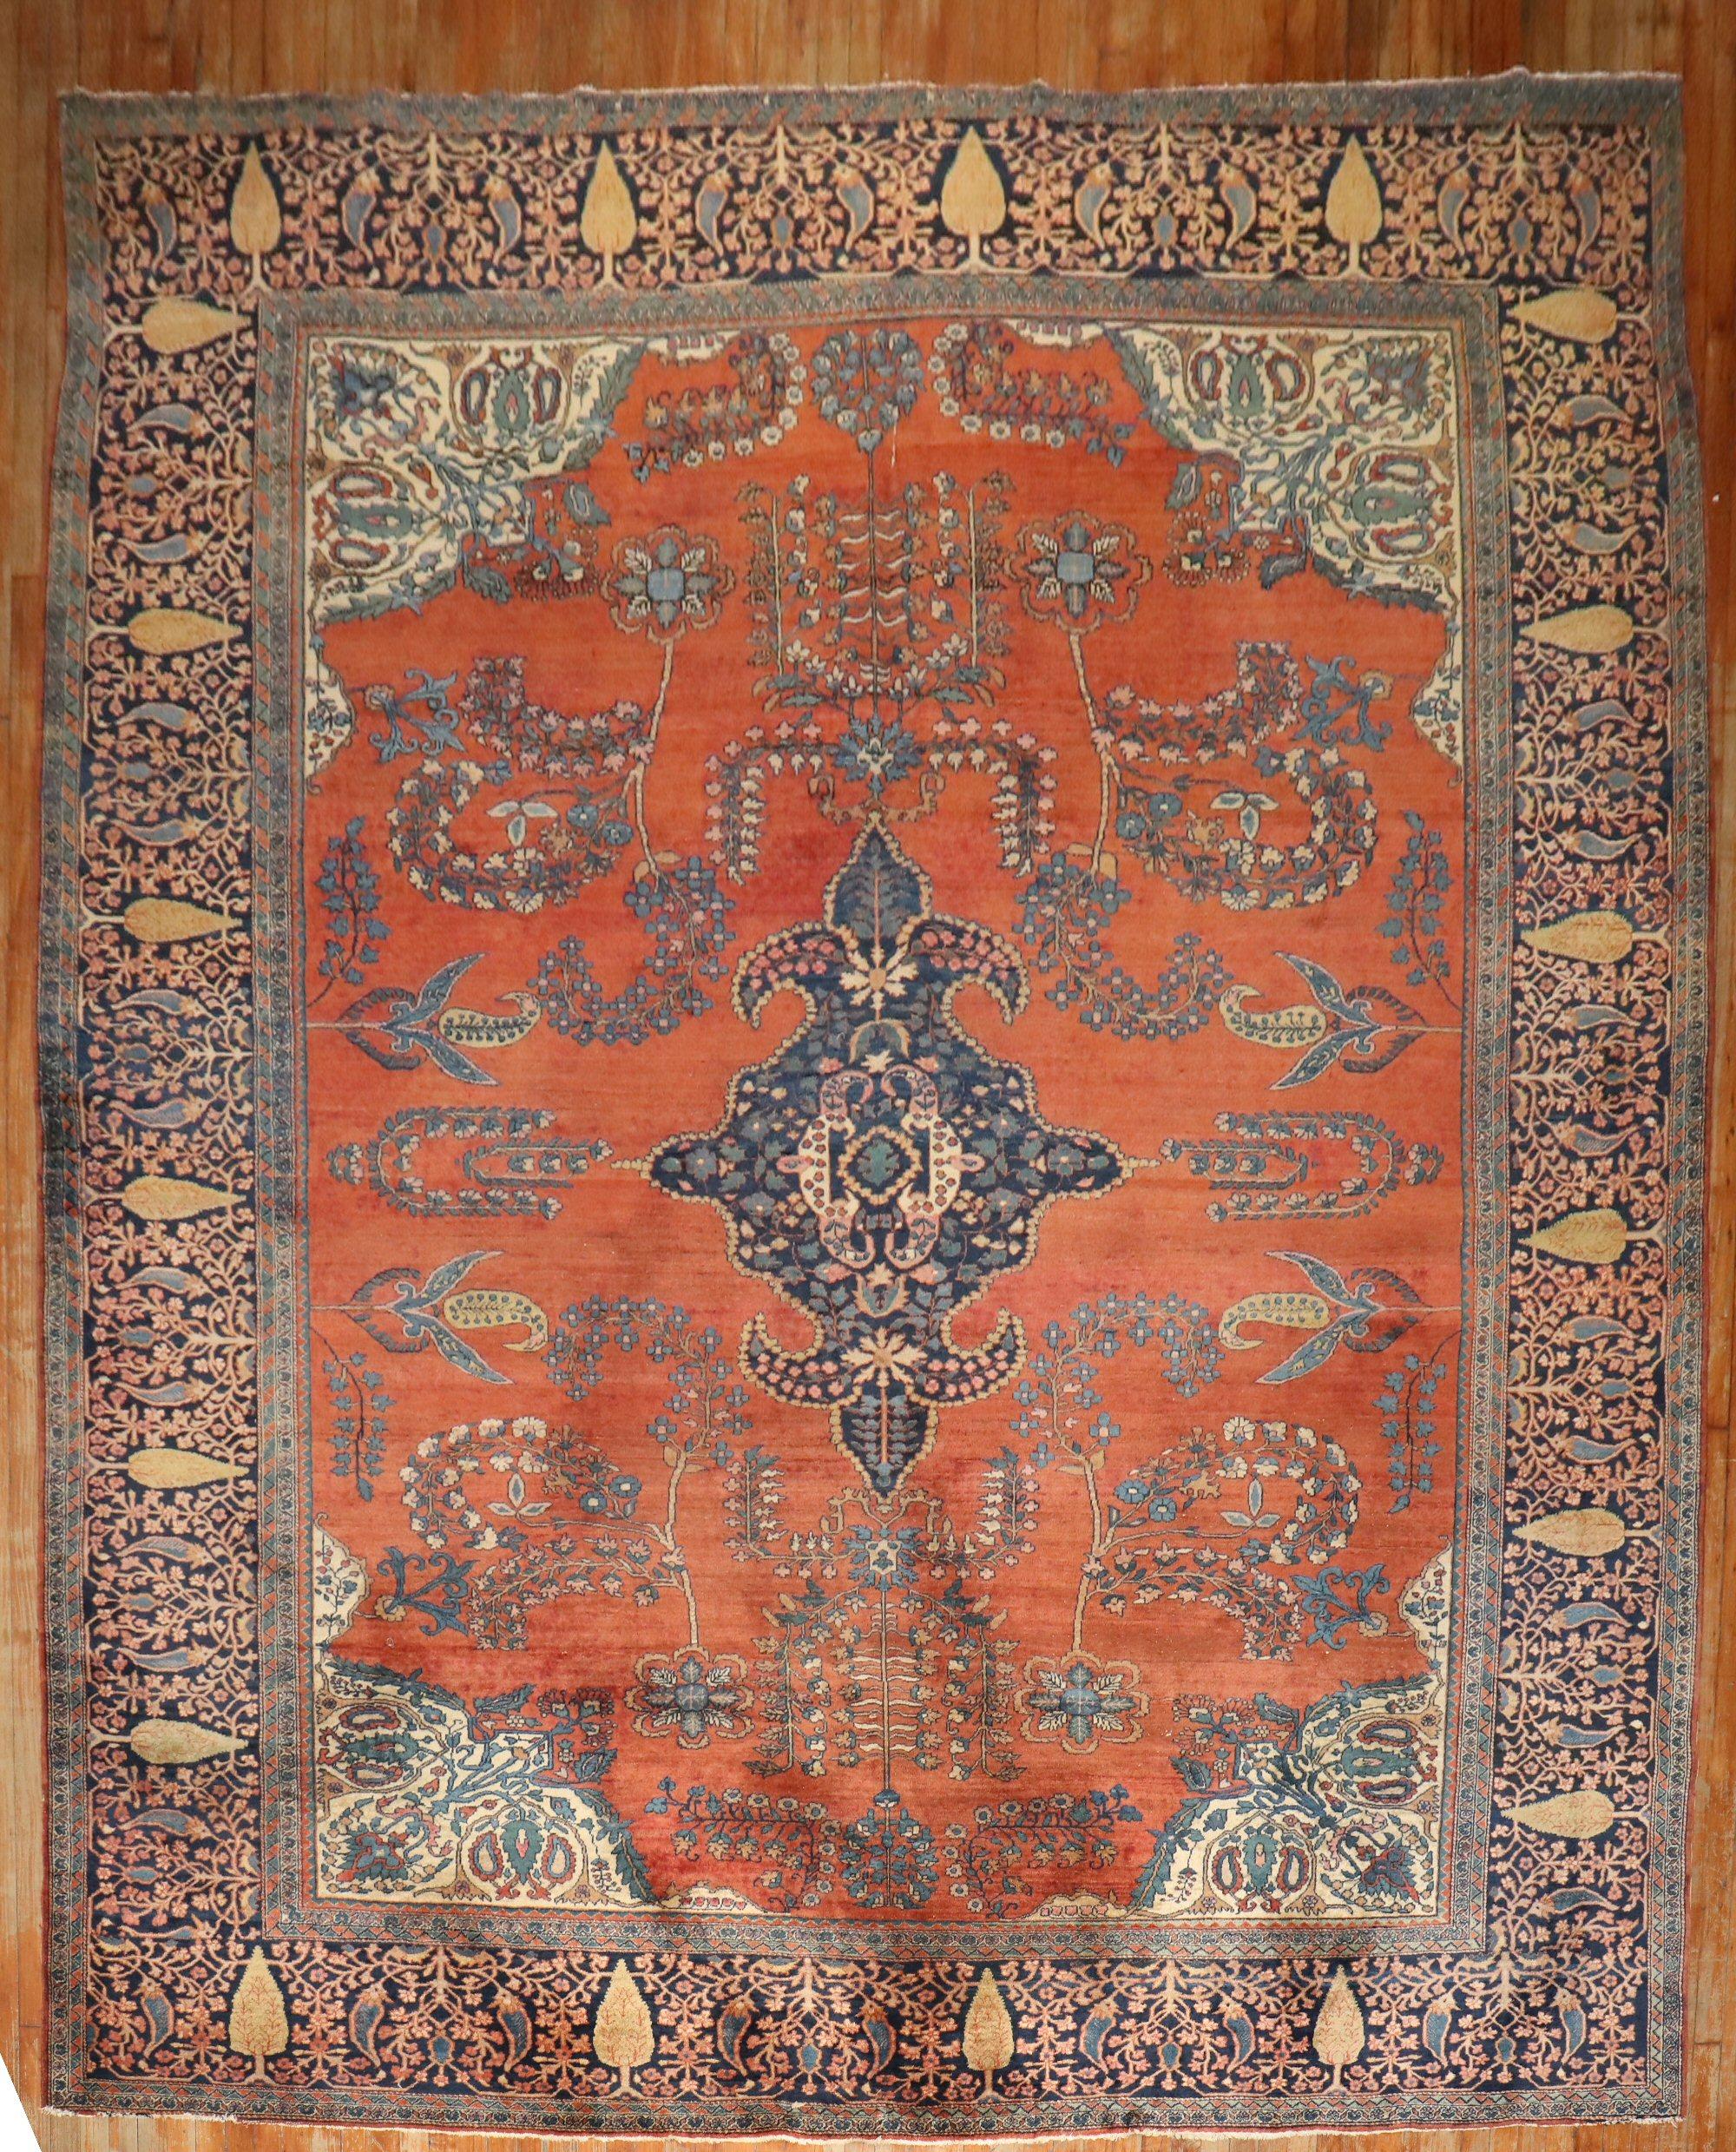 A turn of the 20th century Persian Sarouk Ferehan square room size rug.

Measures: 10'7'' x 12'9''

The finely woven antique Sarouck Ferahan carpets of the 19th century were designed for the Persian aristocracy, who valued them for their exceptional